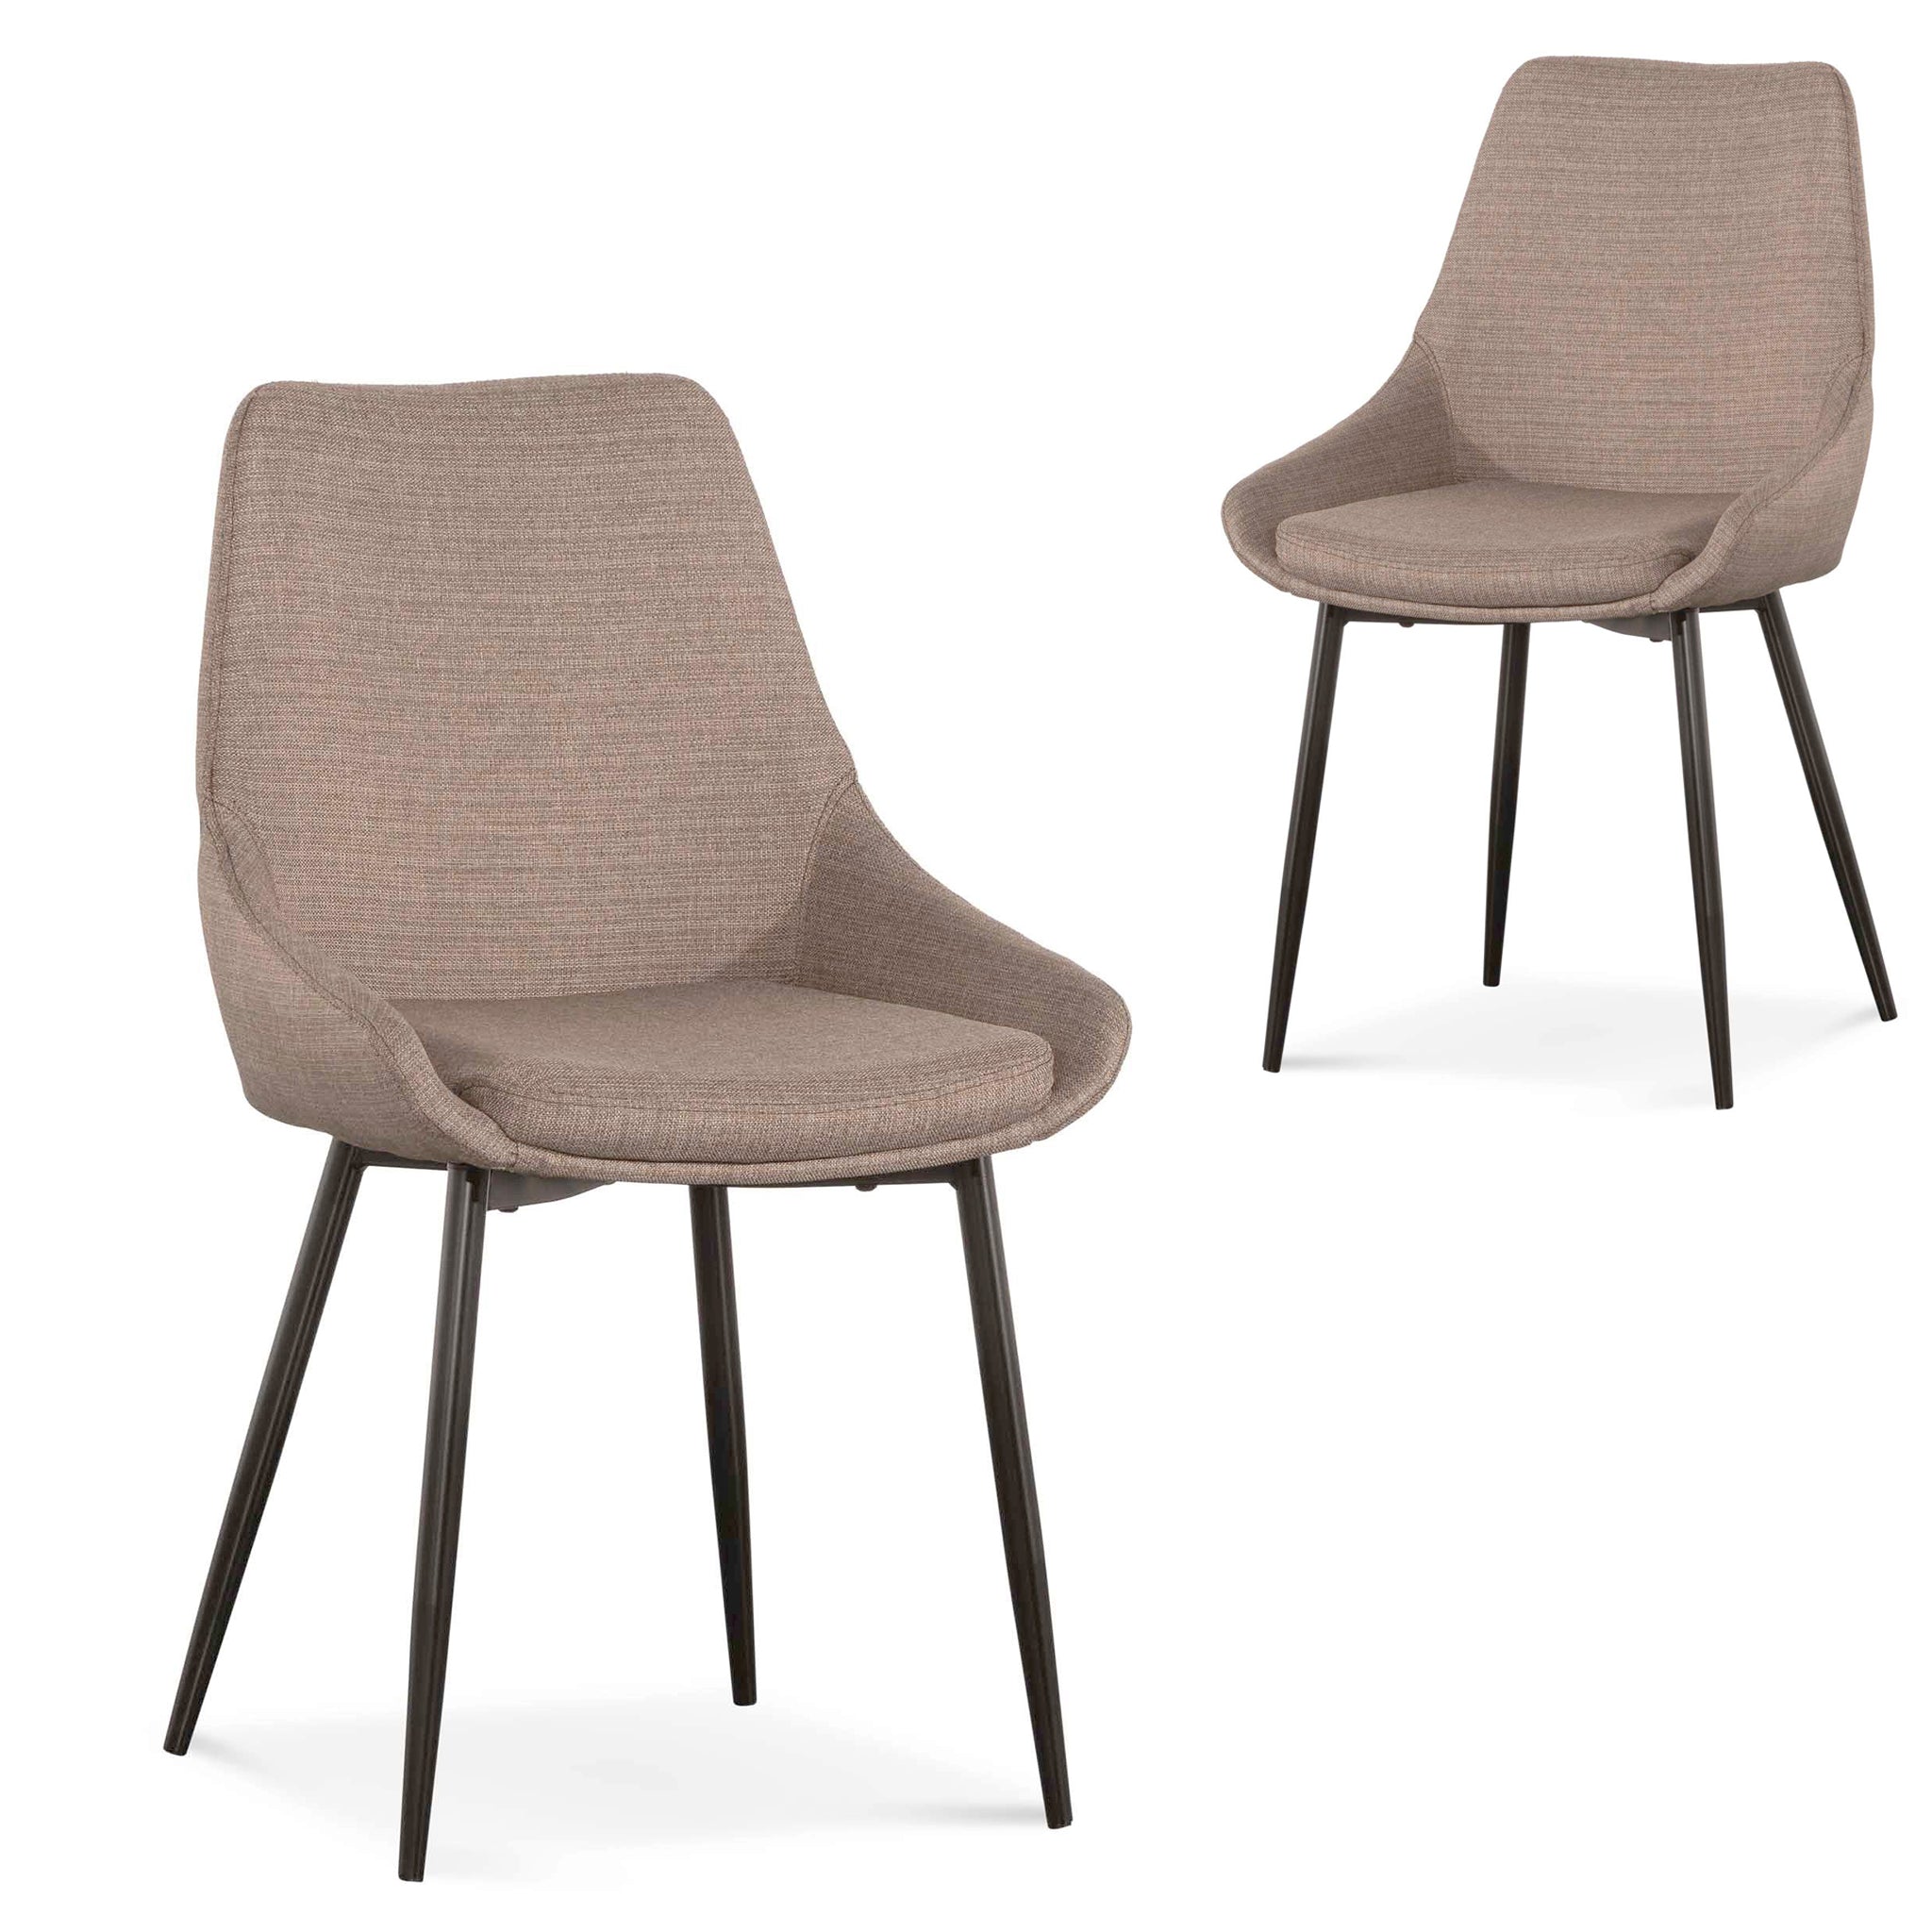 Set of 2 Millie Fabric Dining Chair - Brown Grey - Dining Chairs